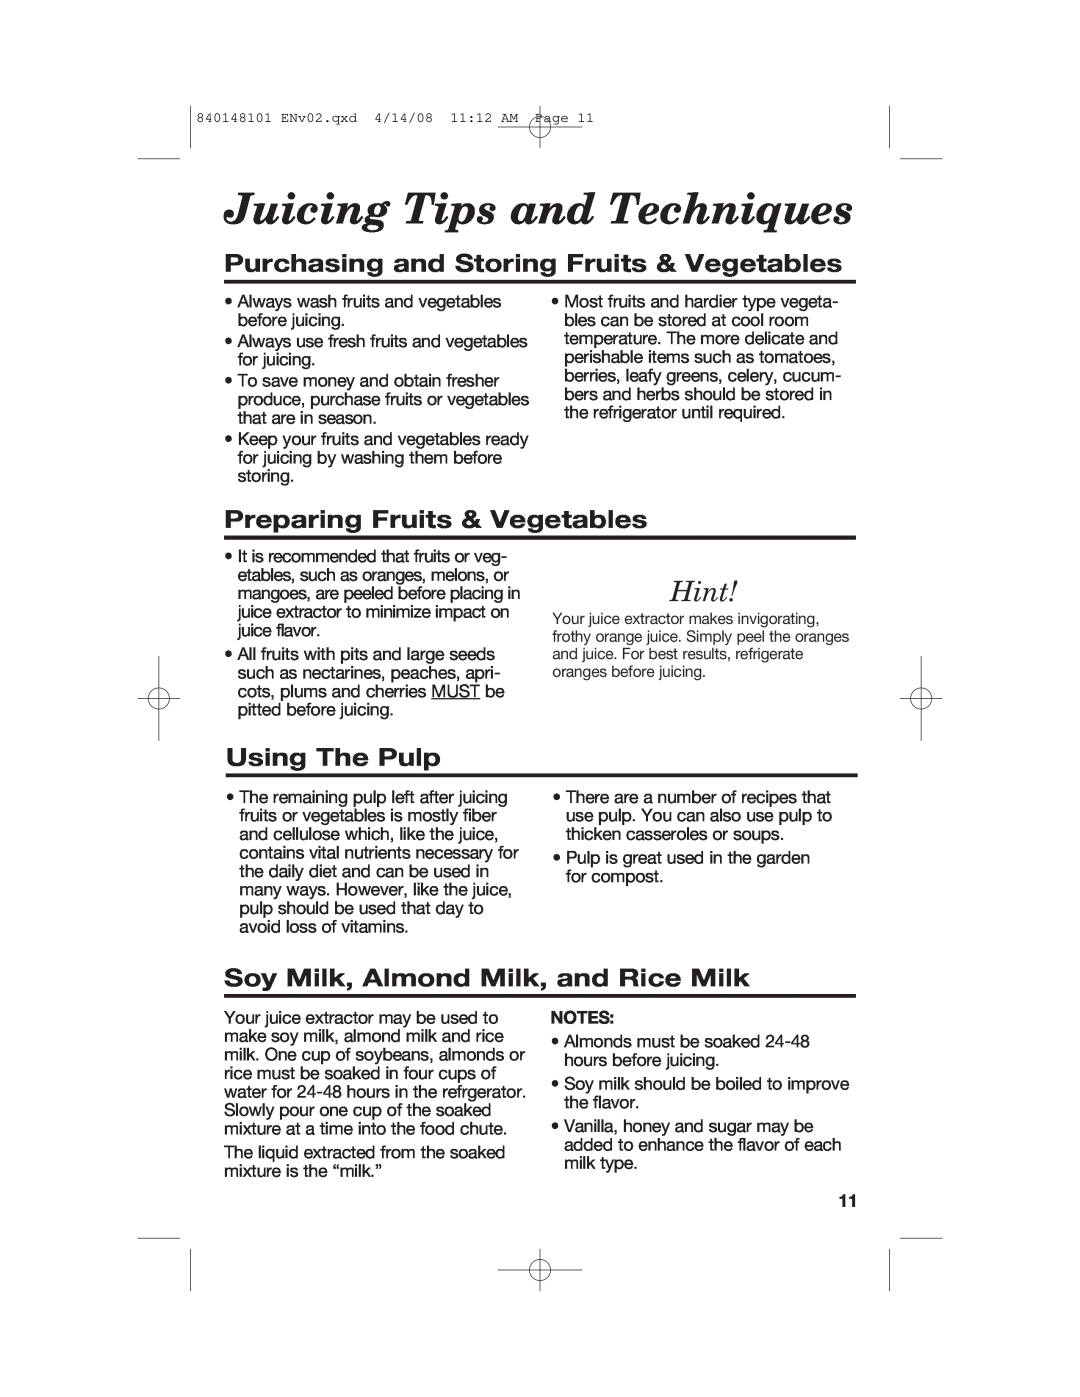 Hamilton Beach 840148101 Juicing Tips and Techniques, Purchasing and Storing Fruits & Vegetables, Using The Pulp, Hint 